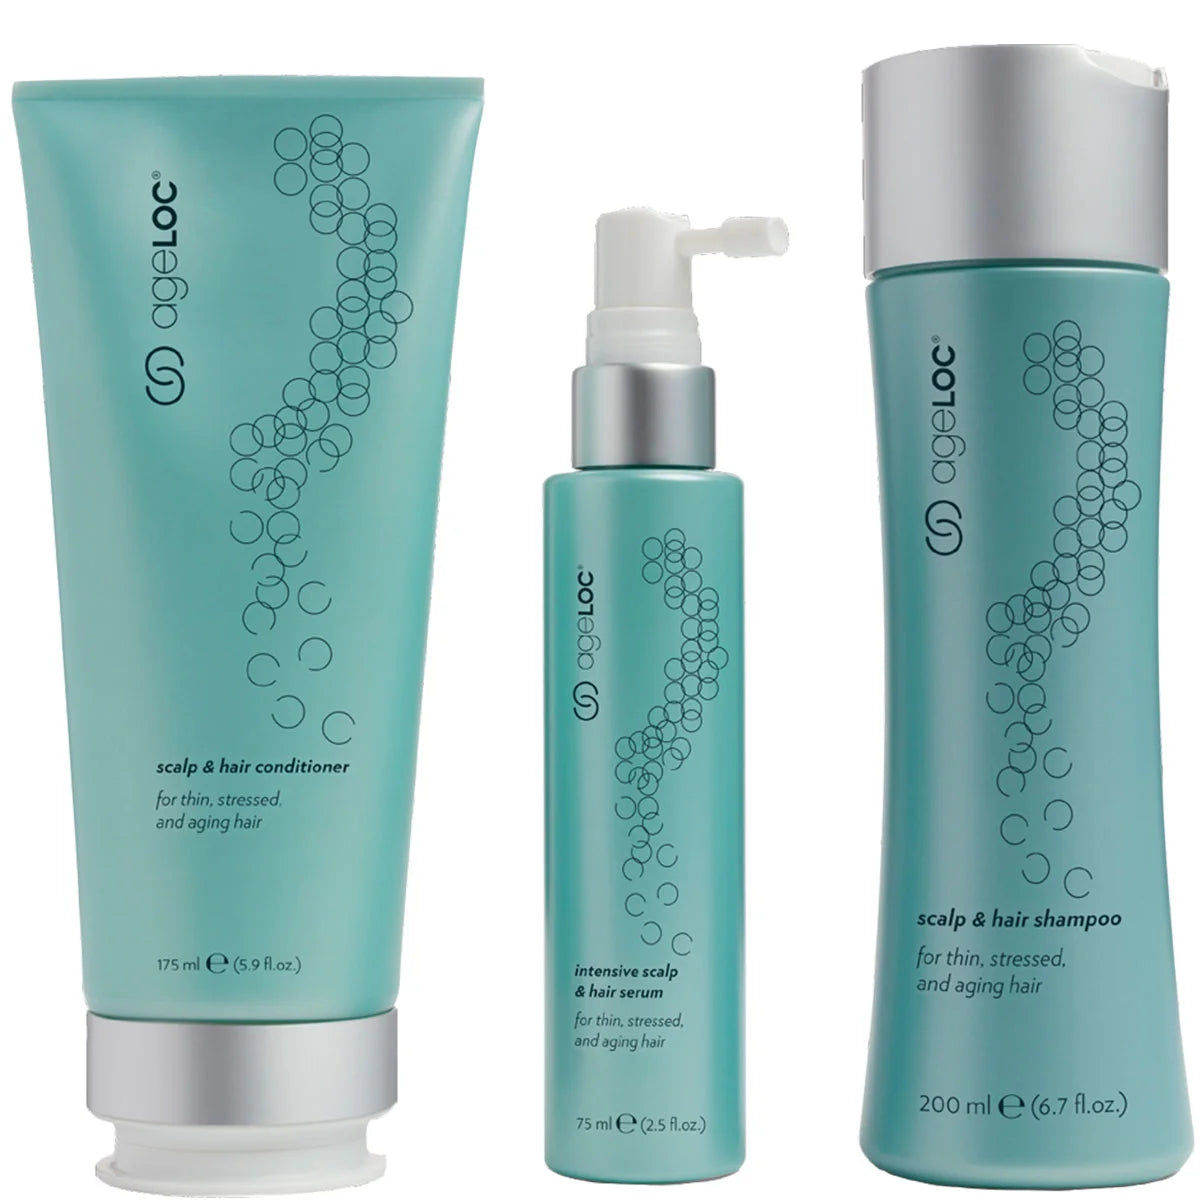 ageLOC® Scalp & Hair System KitBuy ageLOC® Scalp &amp; Hair System Kit
* Discount will apply at checkout. 

A complete hair rejuvenating system. ageLOC Scalp &amp; Hair products contain powerful iageLOC®  Scalp & Hair System Kit